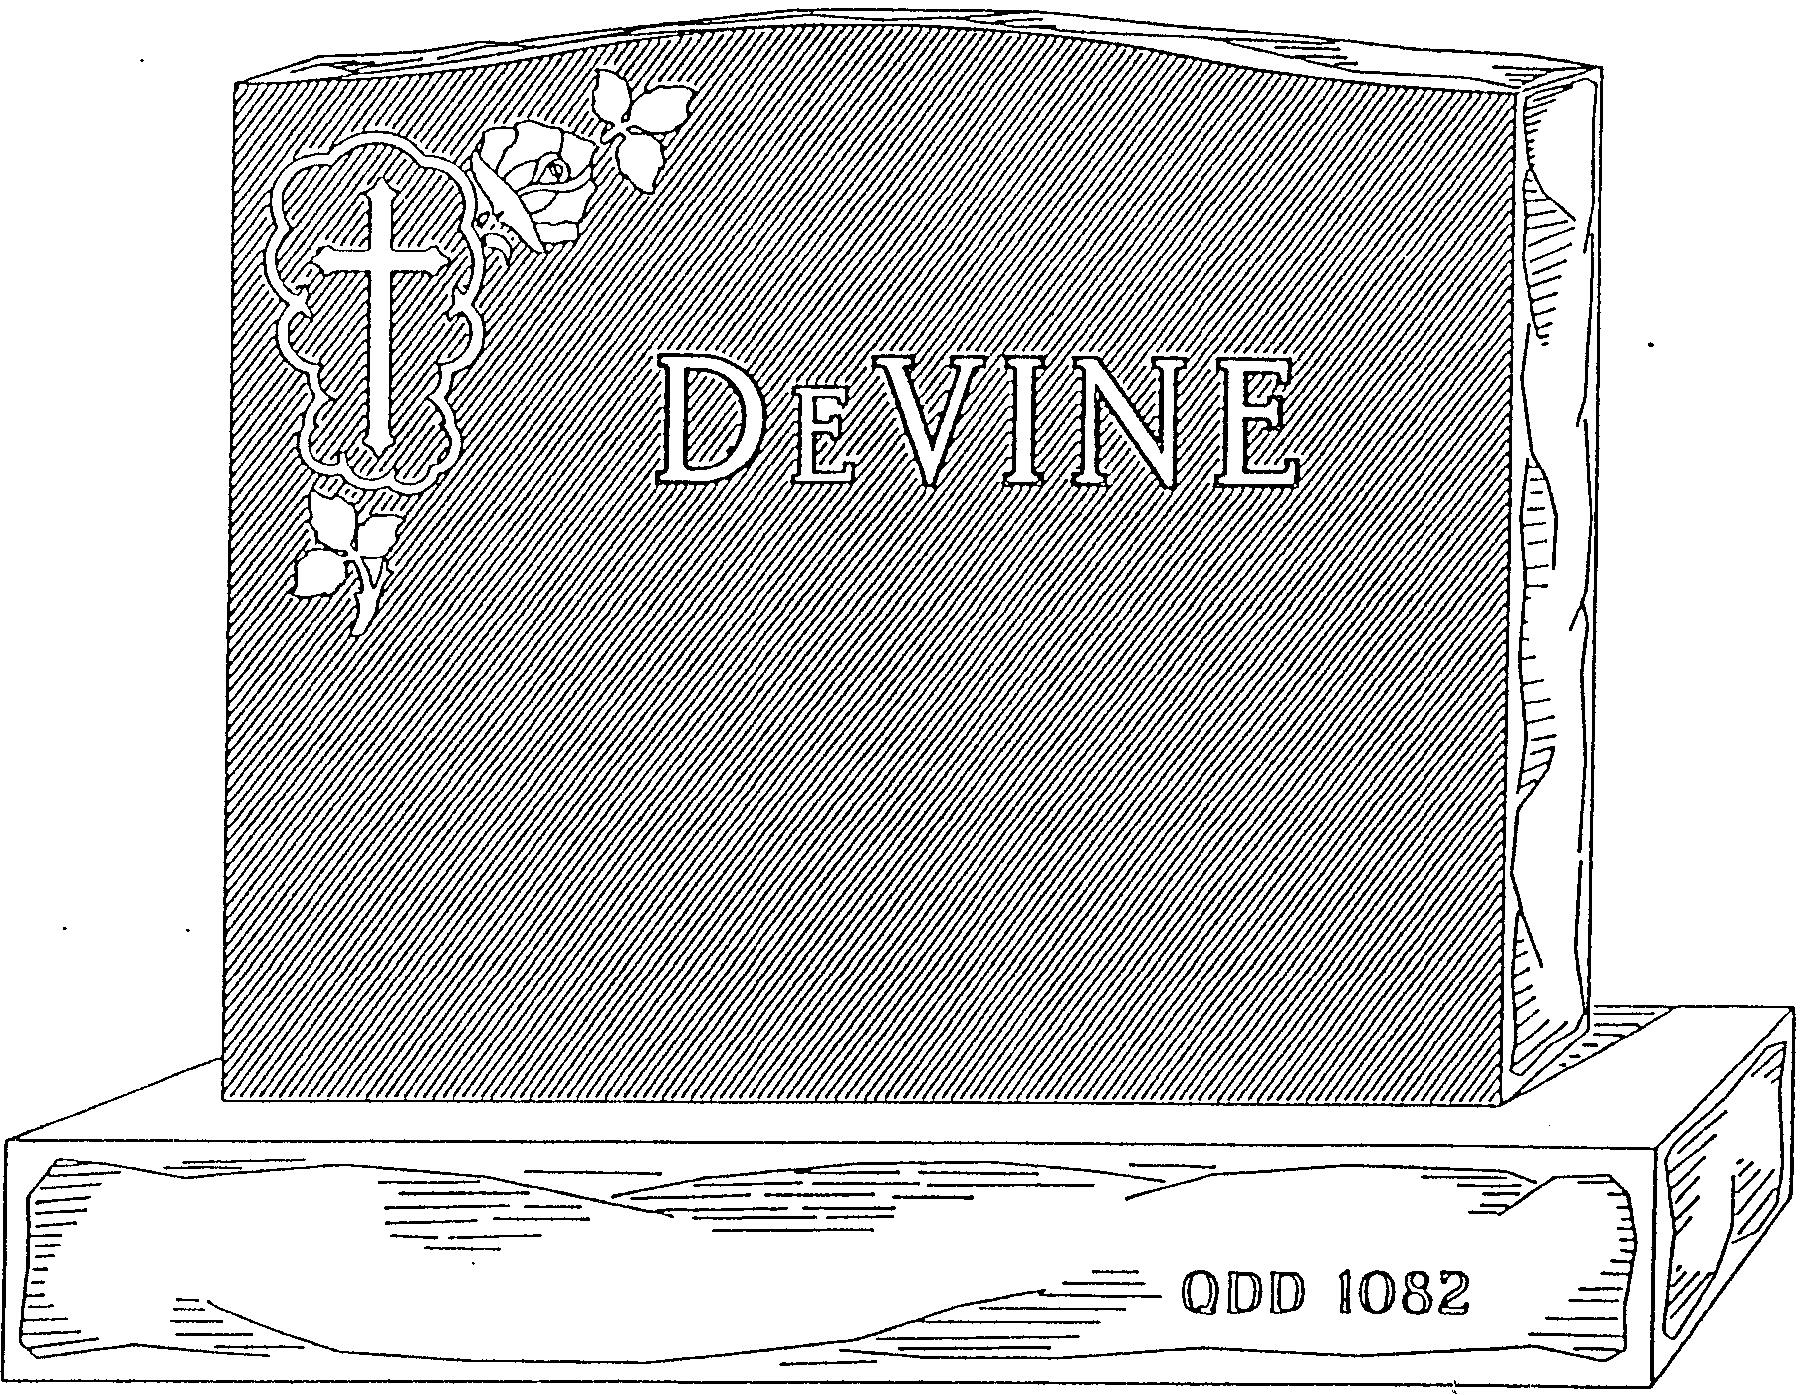 a black and white drawing of a gravestone with the name devine written on it .